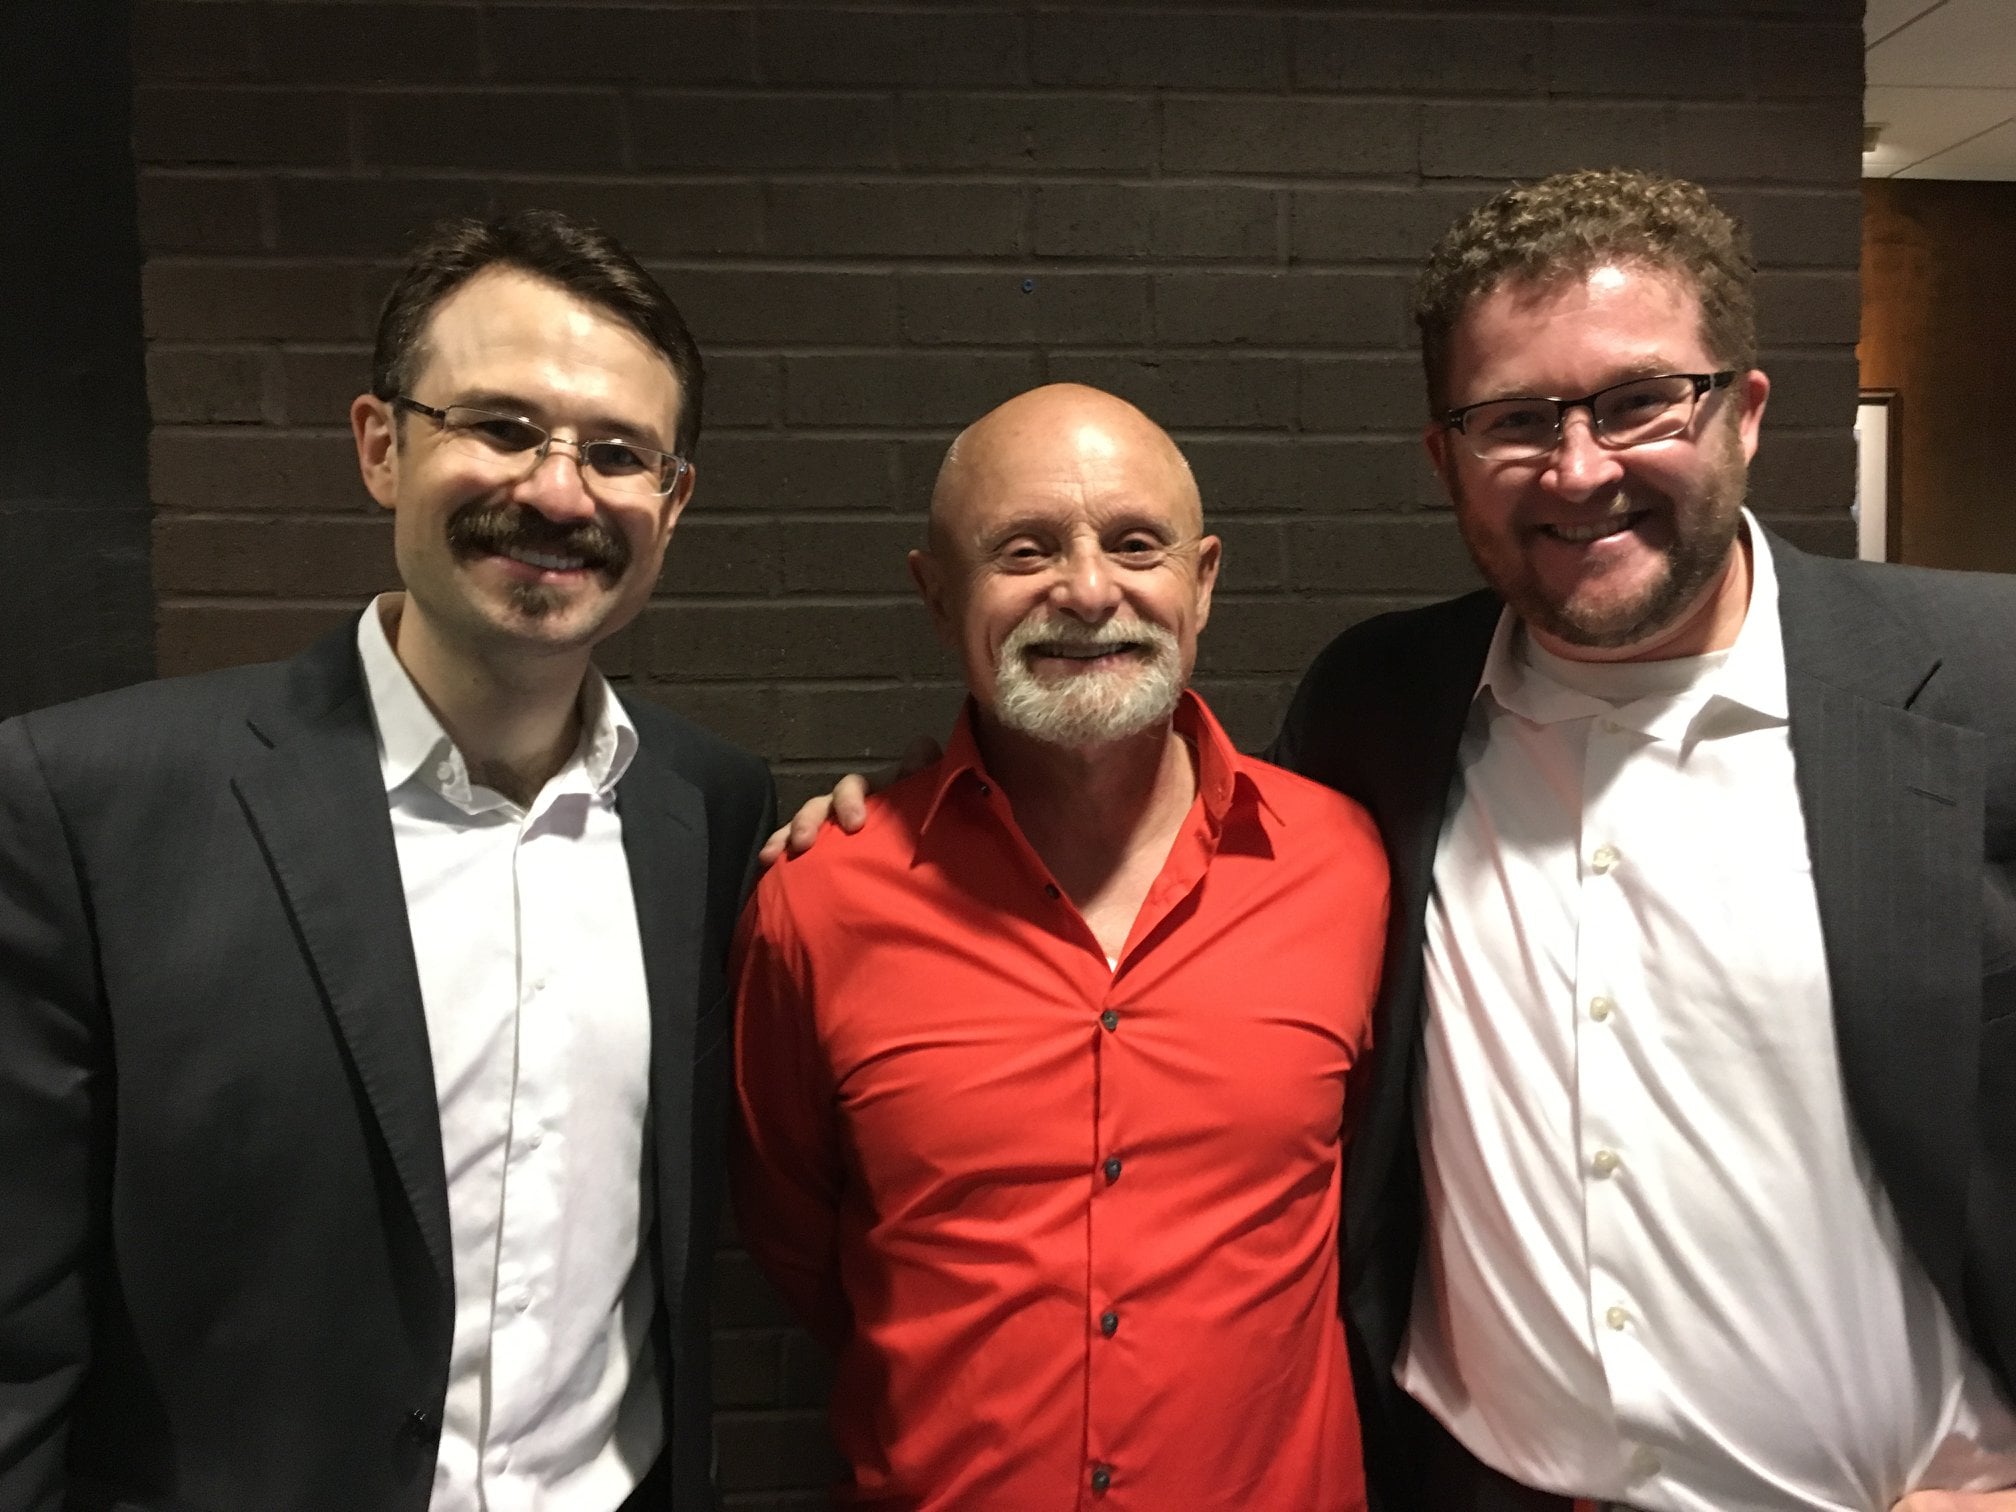 WIth Mark and Corey after the premiere of Tango No. 1 at Viterbo University